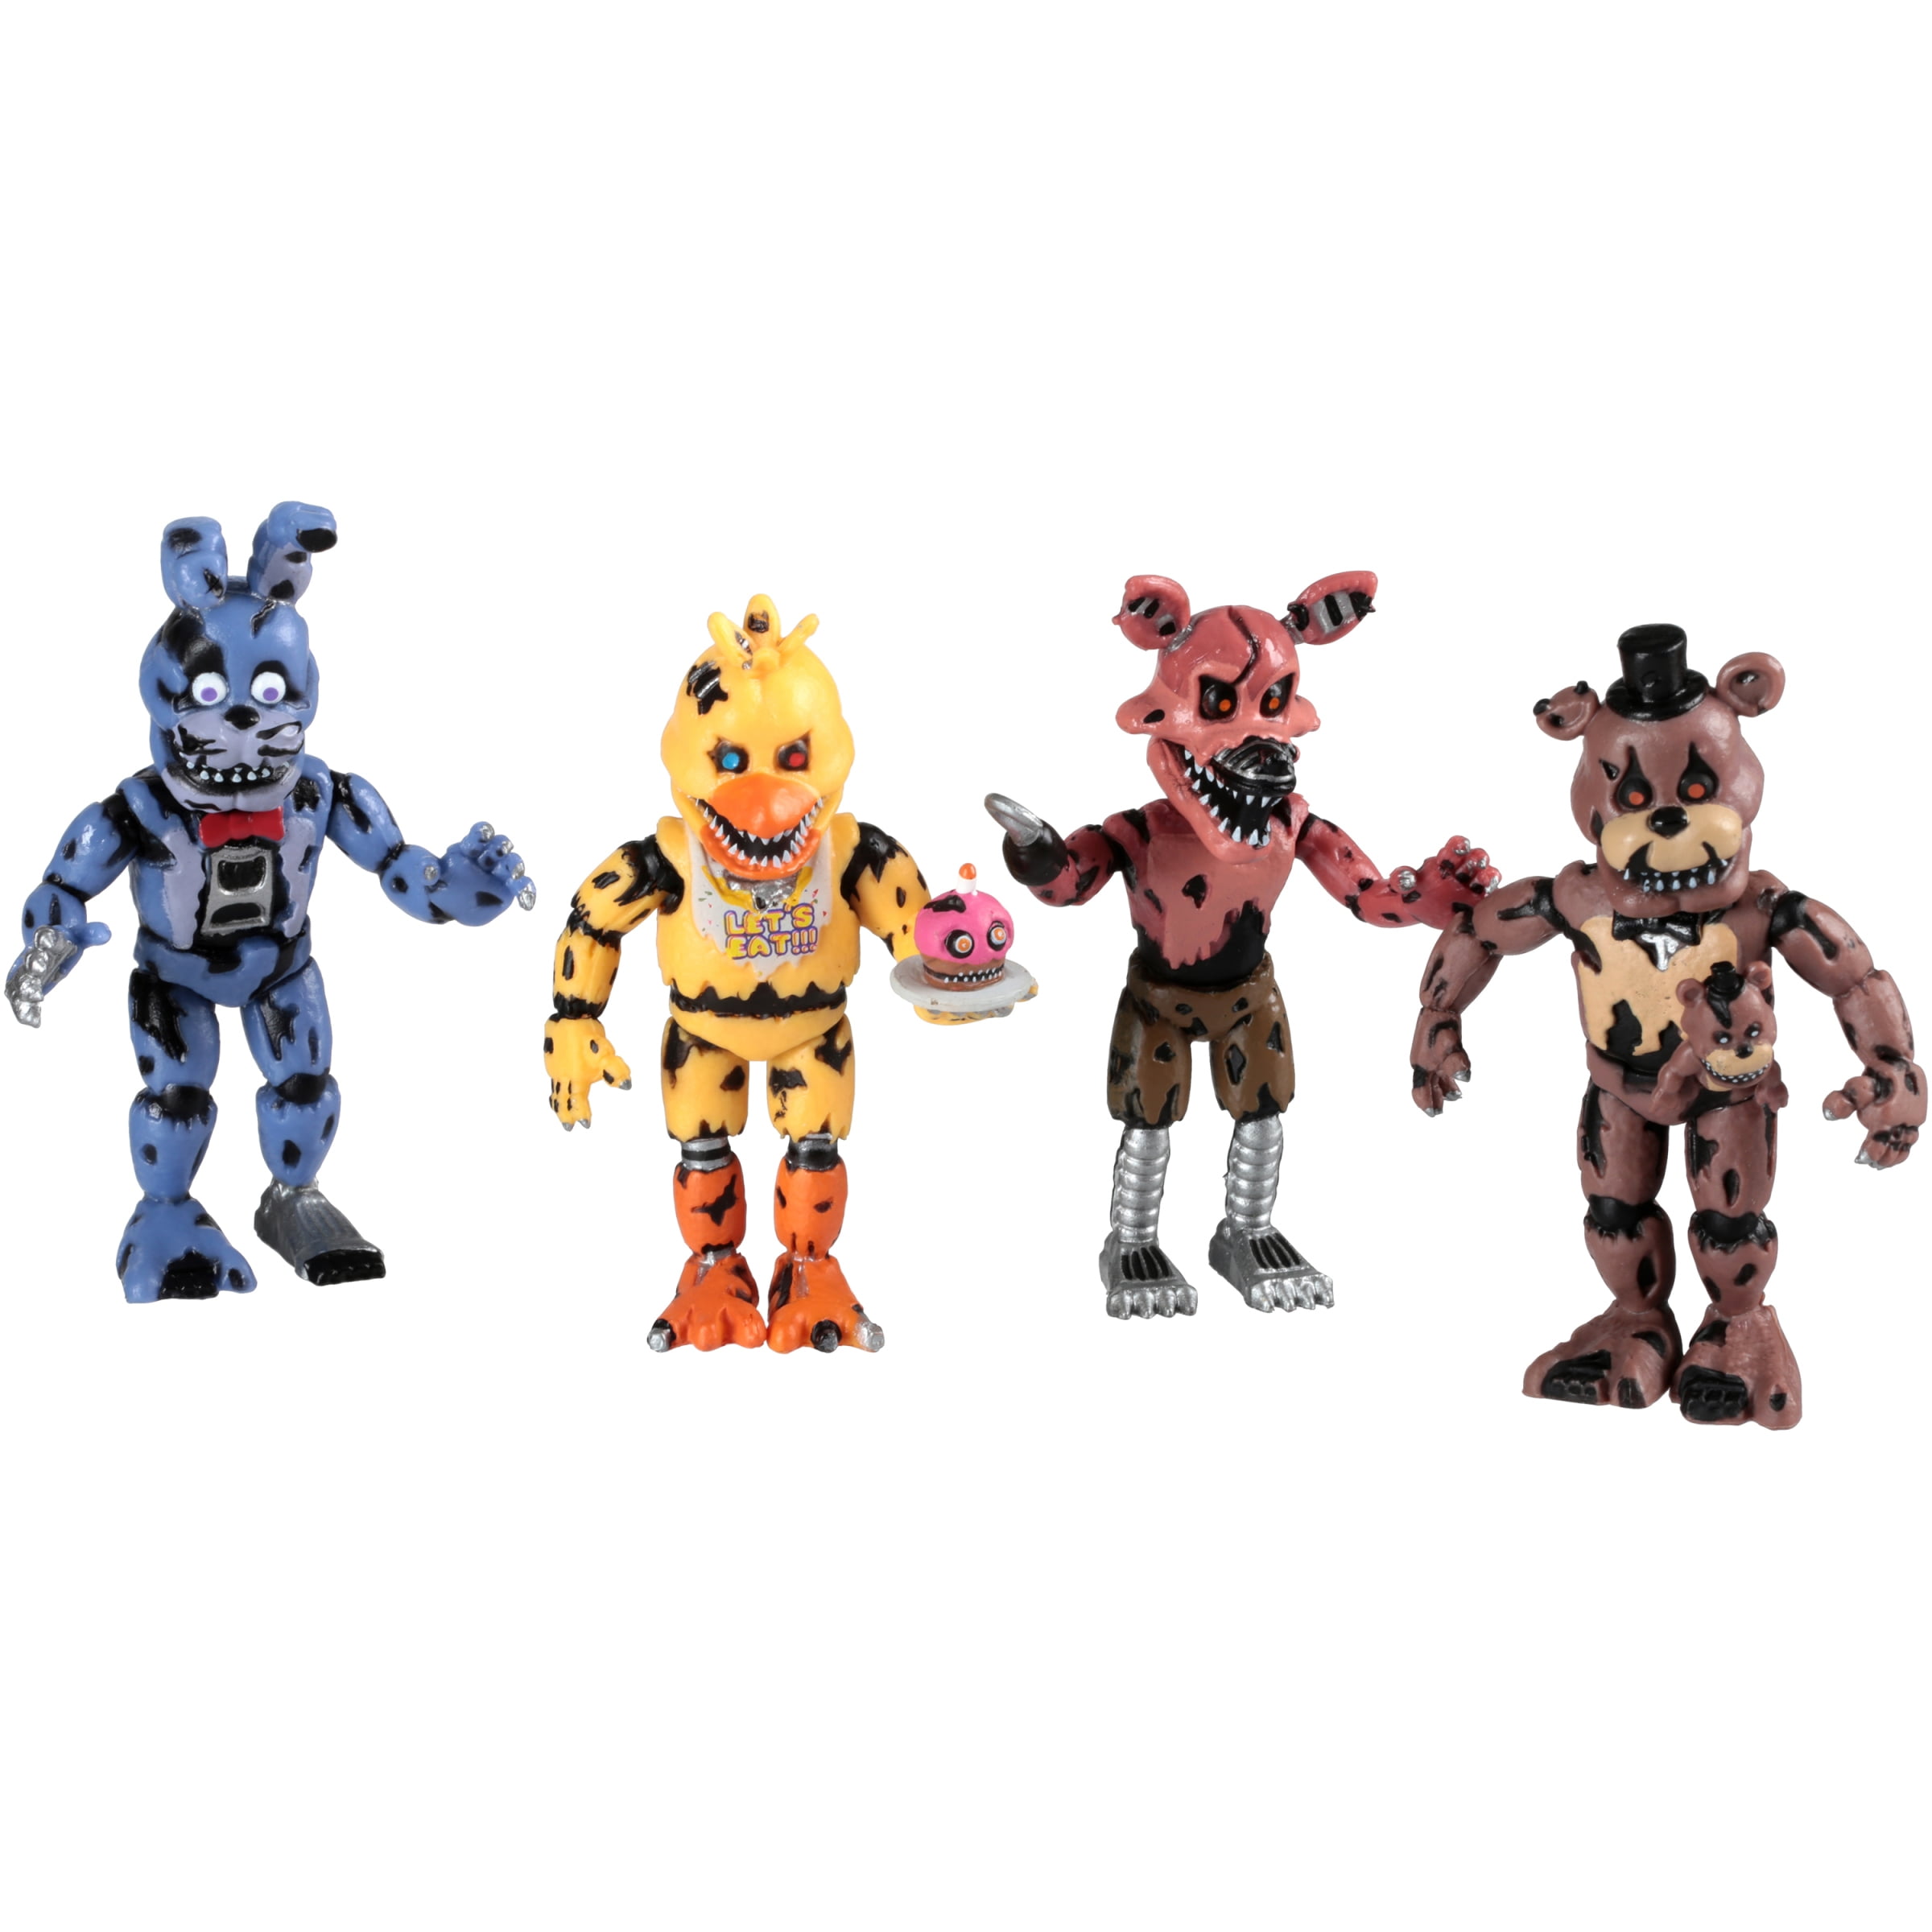 Set of 4 Five Nights at Freddy's 2 Mini Toy Figures 11 